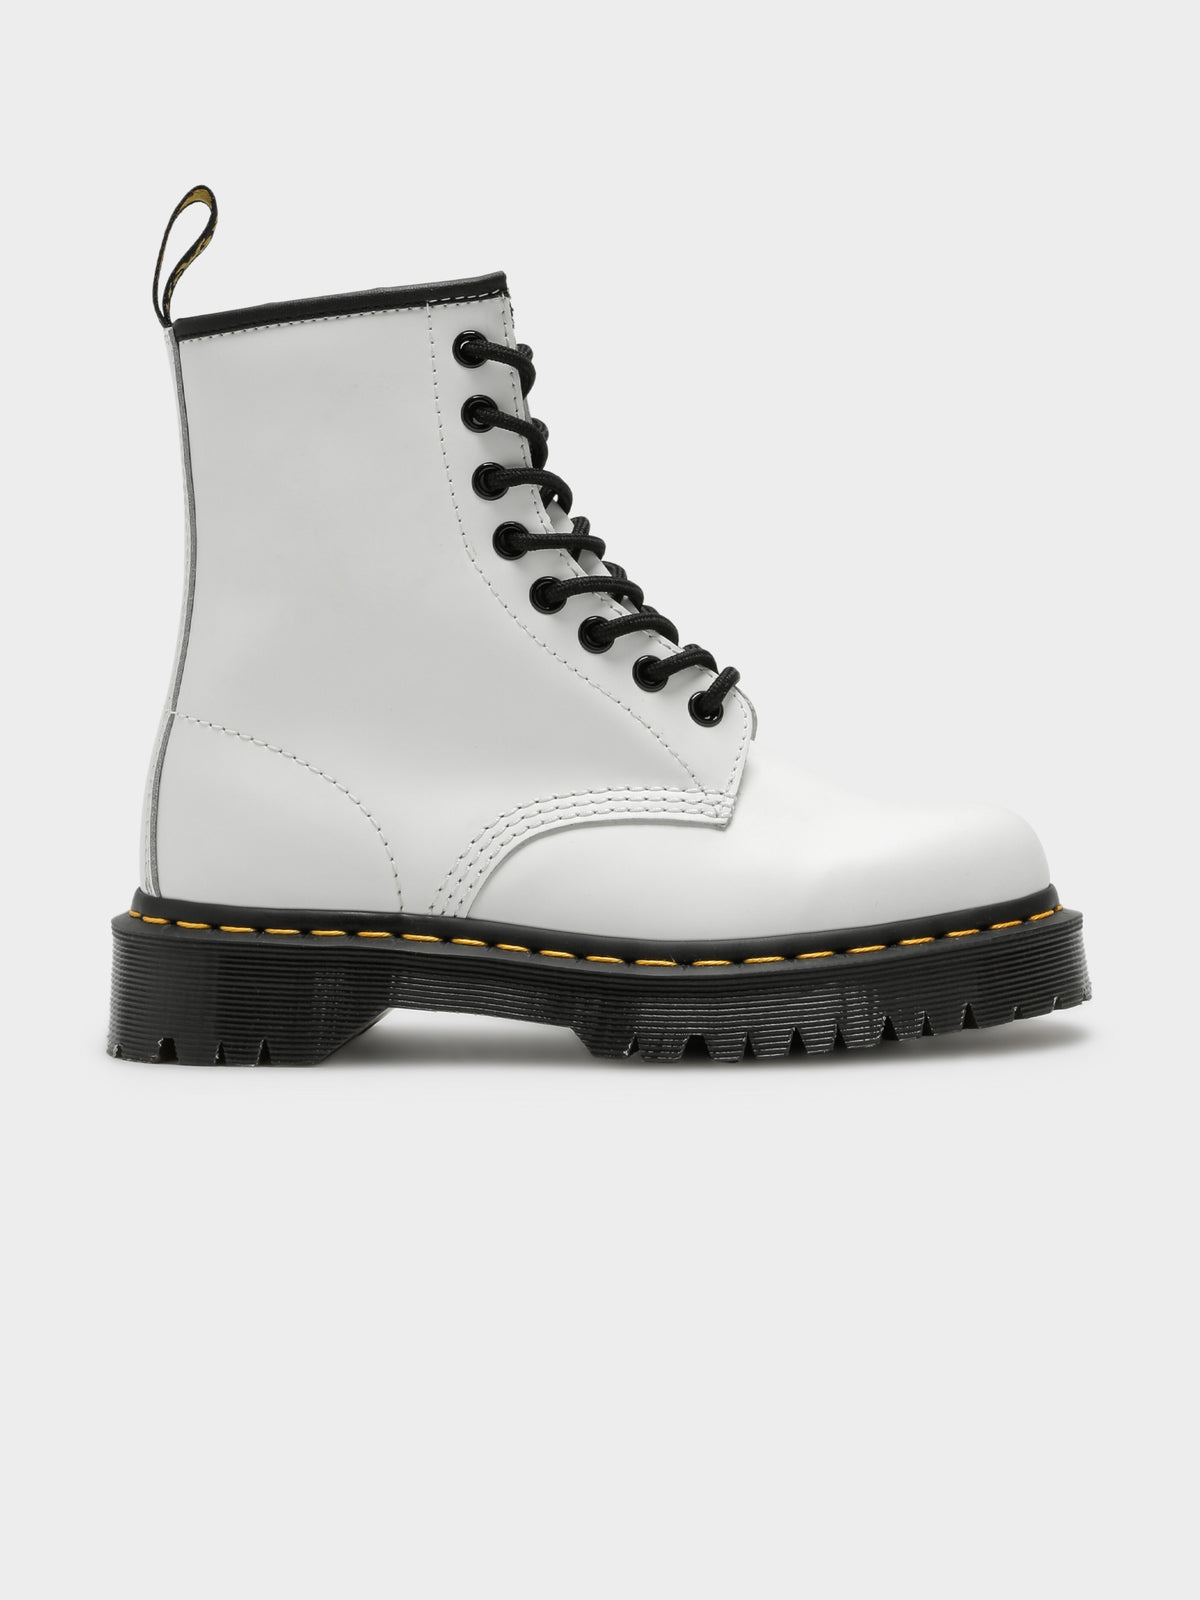 Unisex 1460 Bex Boots in White